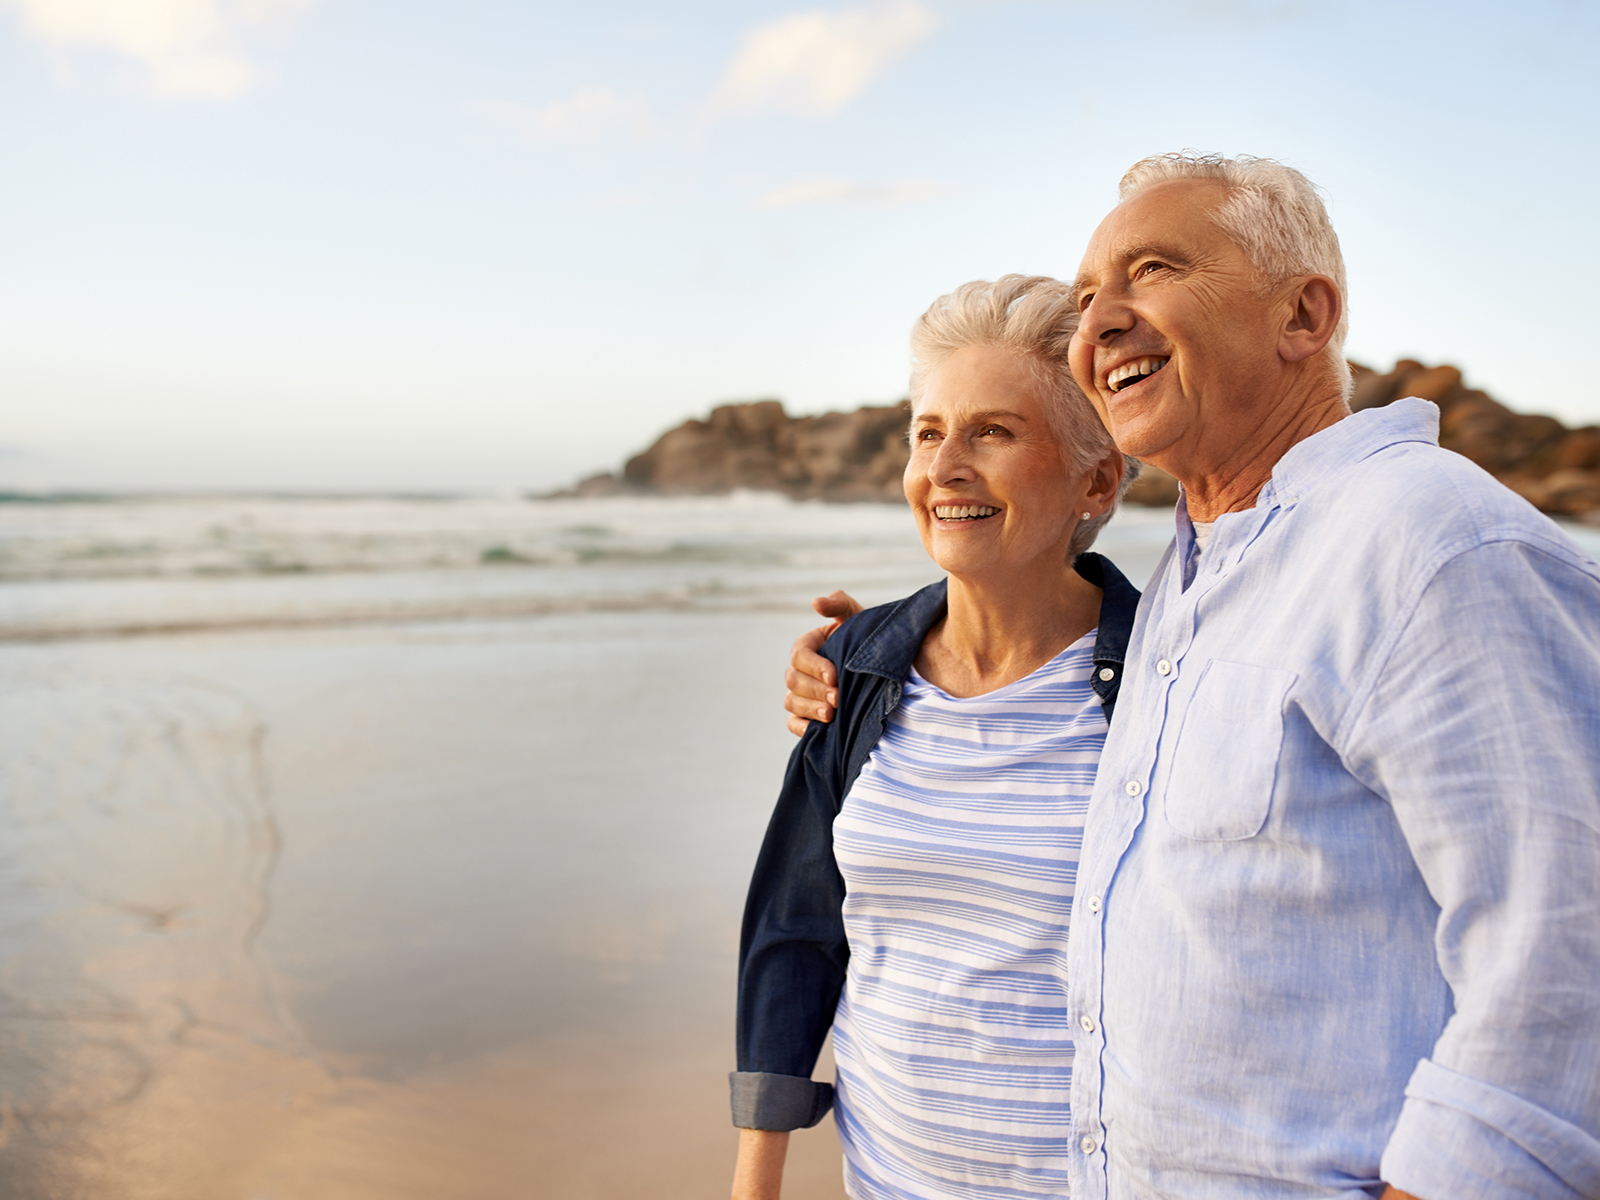 Senior couple smiling while standing at the beach shore.